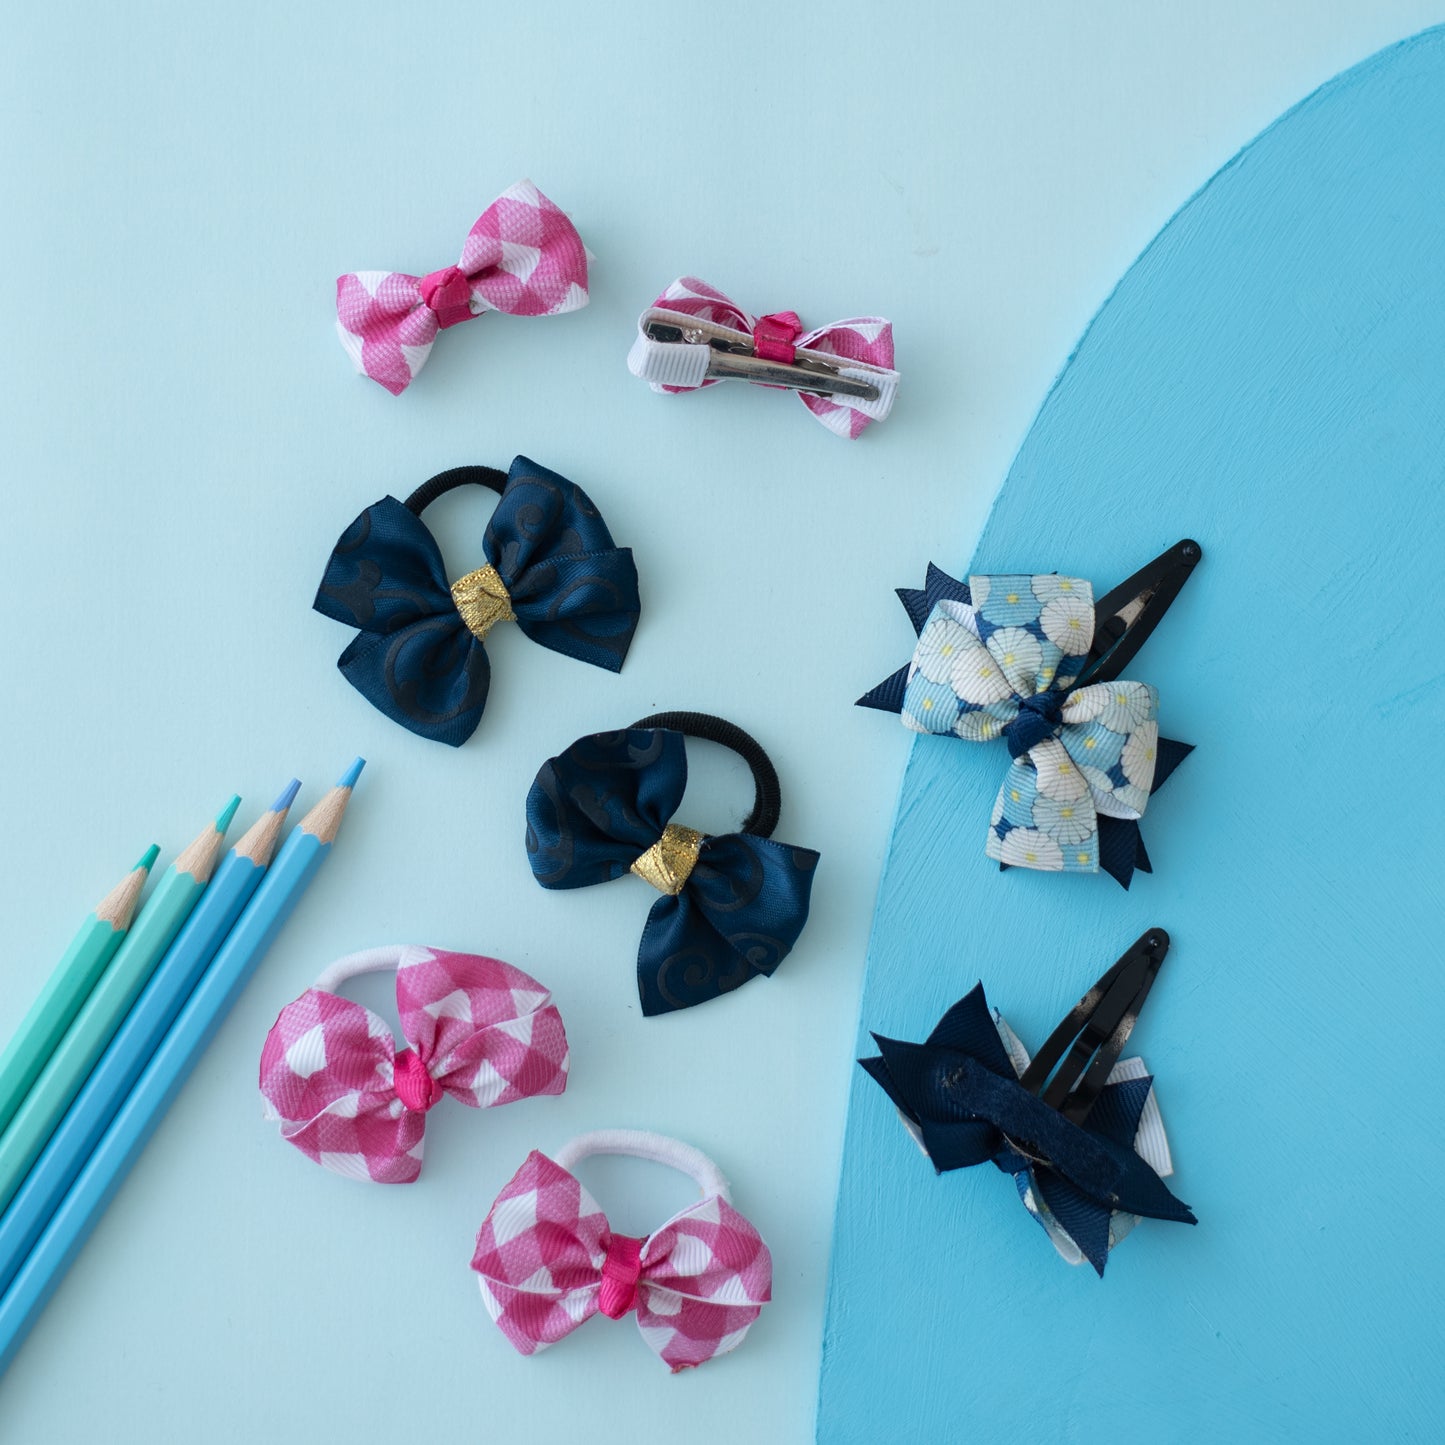 Combo: Checkered bow alligator clips and rubberbands and floral printed double bow tic-tac clips and rubberbands - Light Pink, Nevy blue